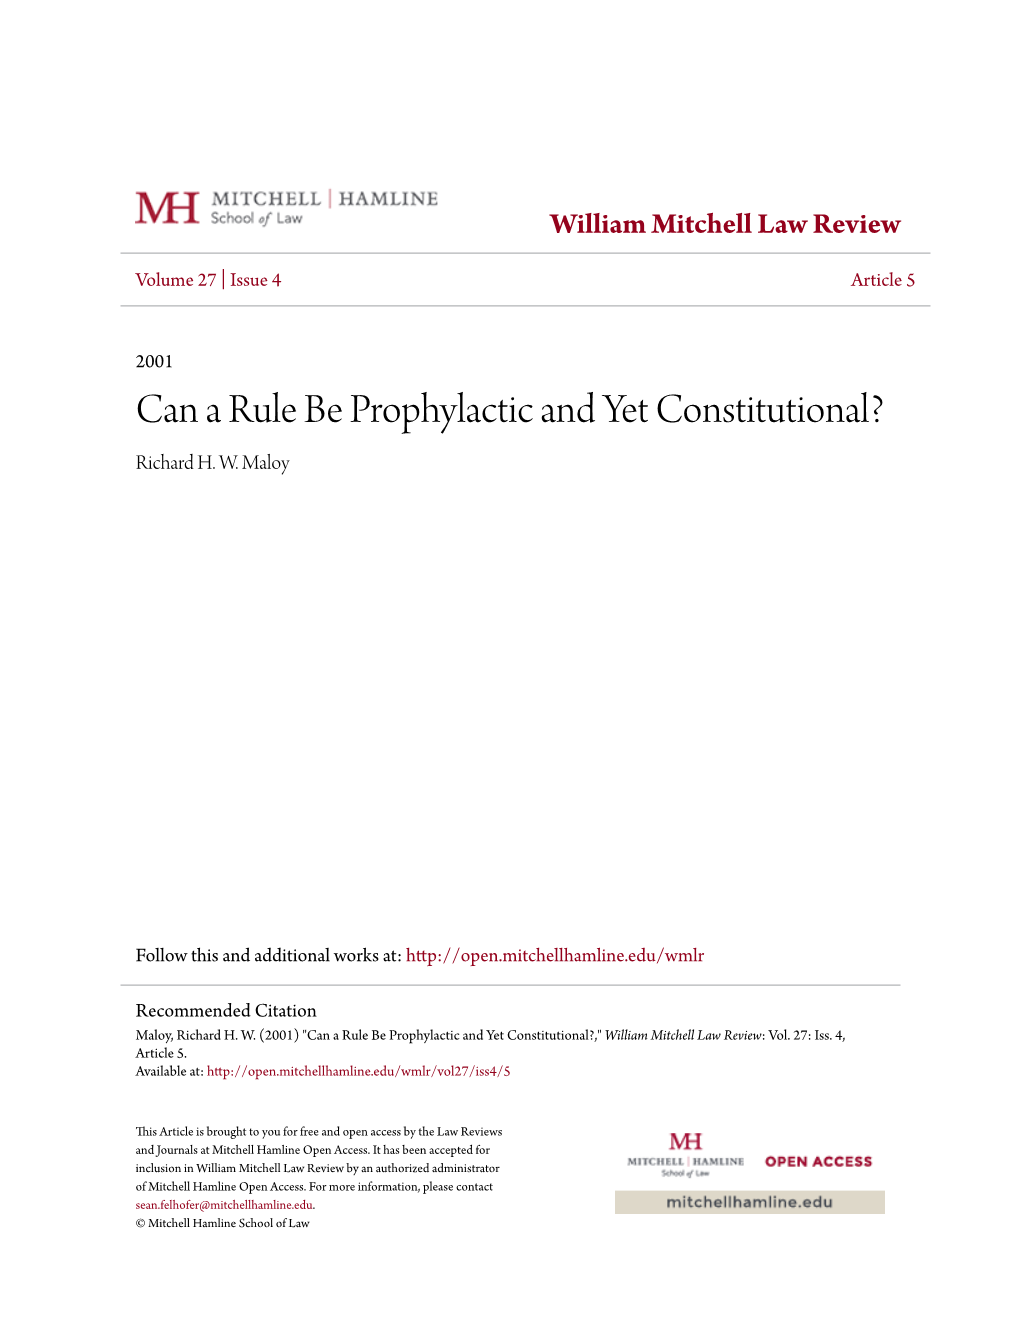 Can a Rule Be Prophylactic and Yet Constitutional? Richard H